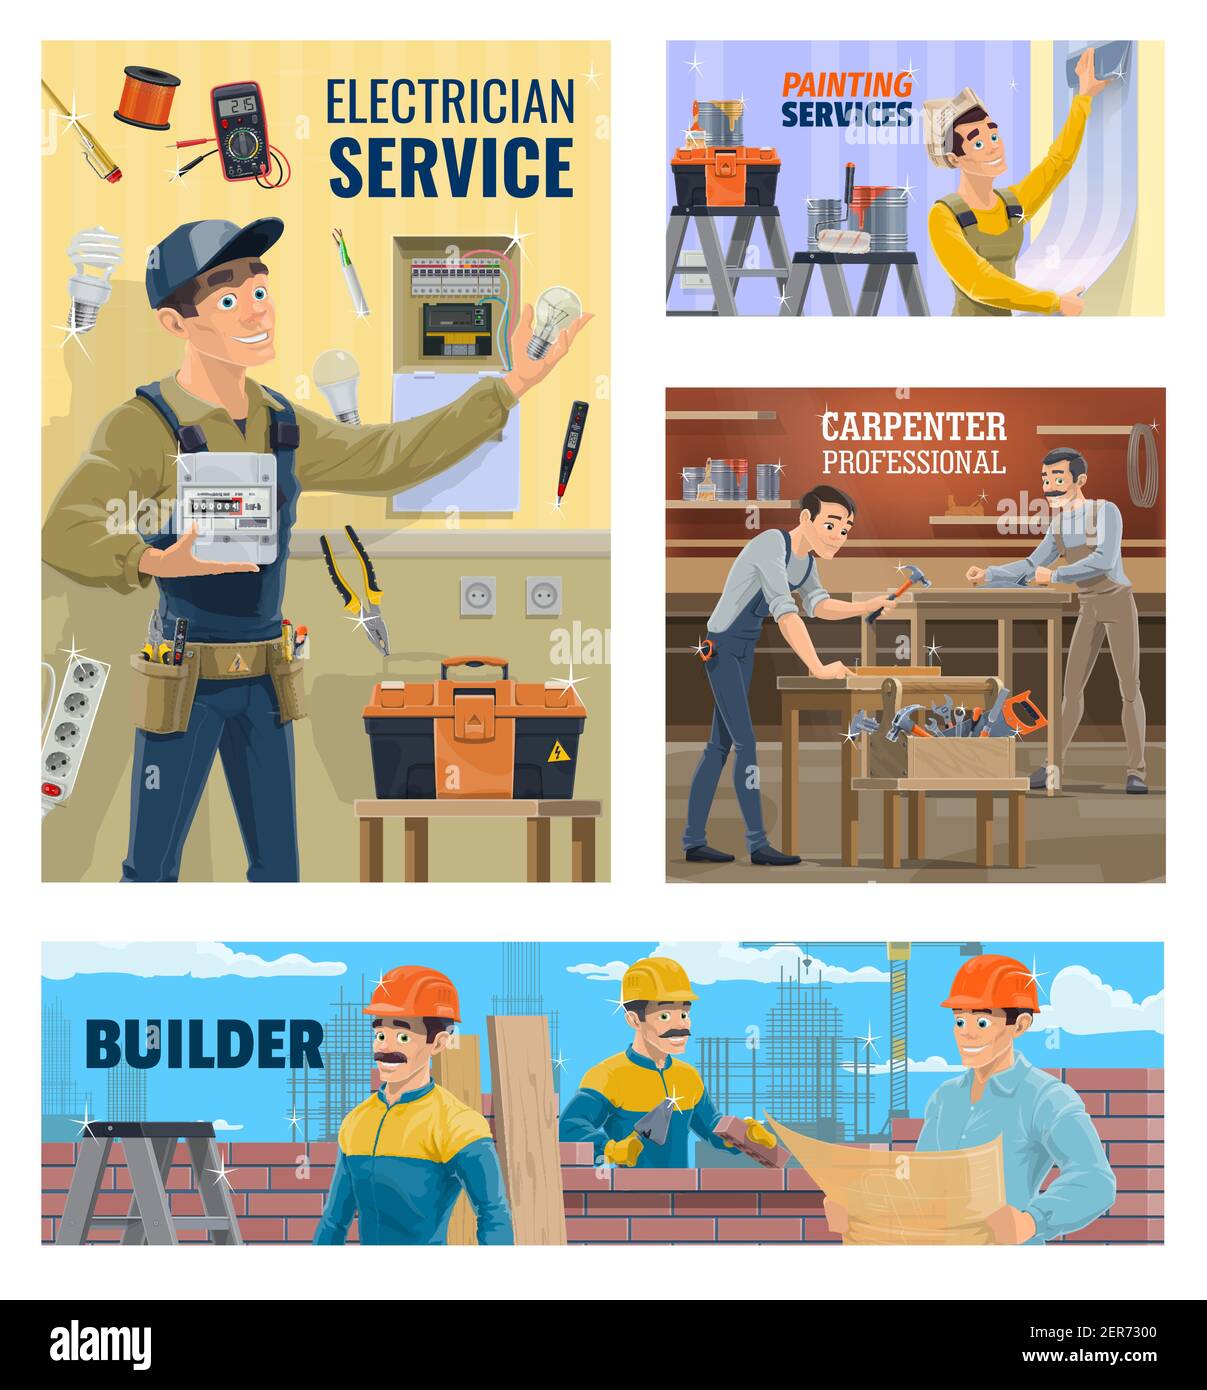 Electrician and painting service, builder and carpenter banner. Electrician installing energy meter, worker wallpapering room and carpenters working i Stock Vector